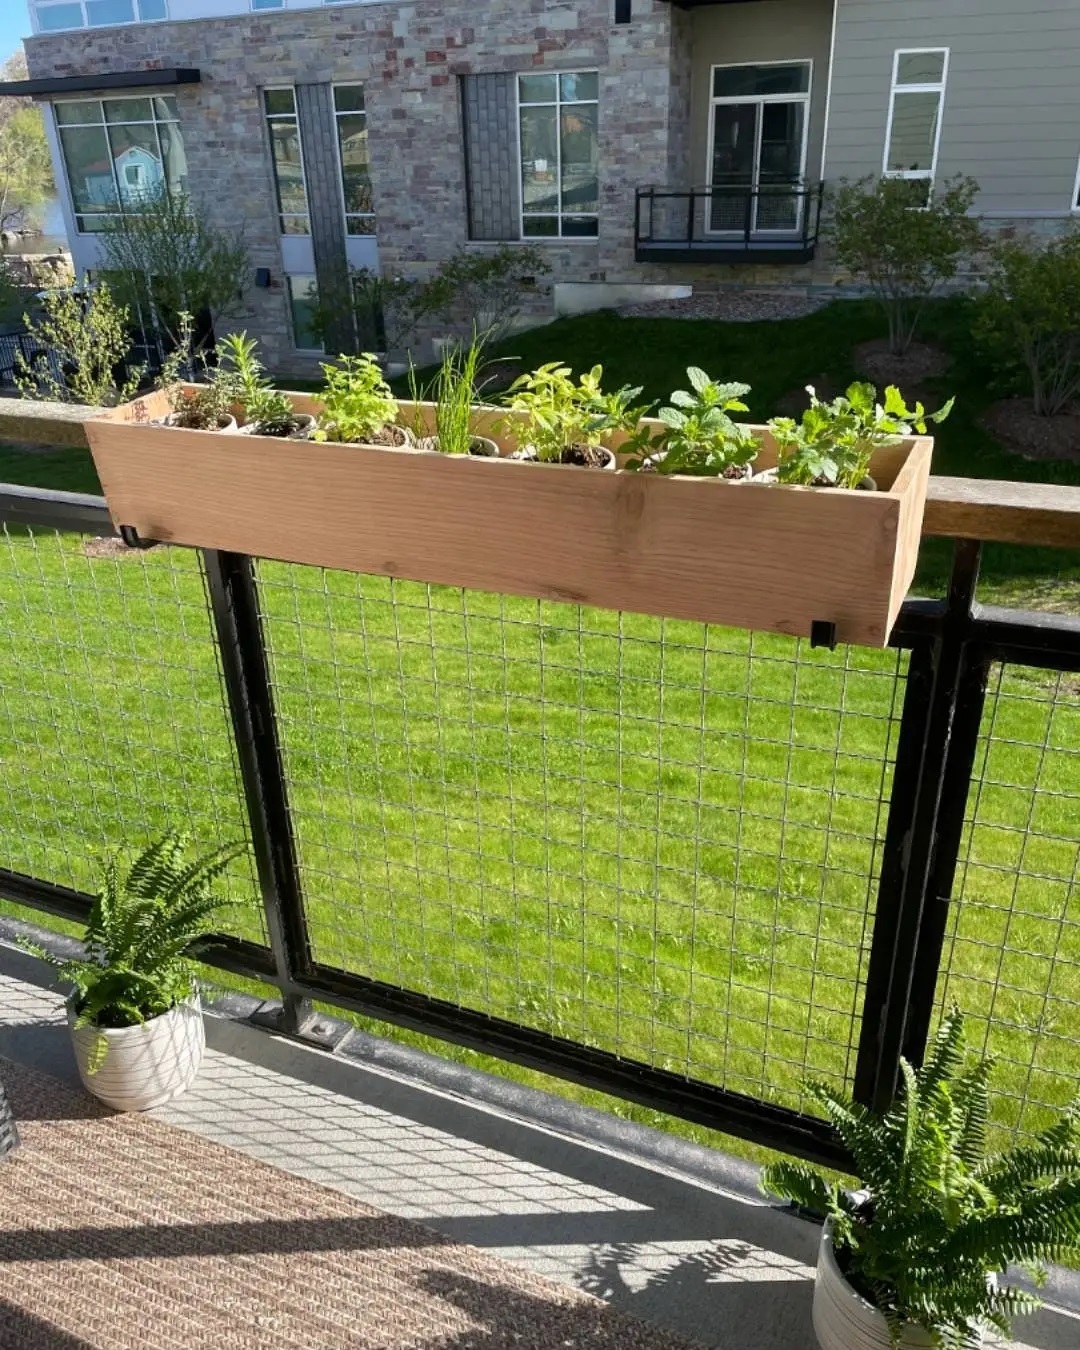 Homemade Railing Planter on an Apartment Balcony. Photo by Instagram user @demeyerwoodcrafts